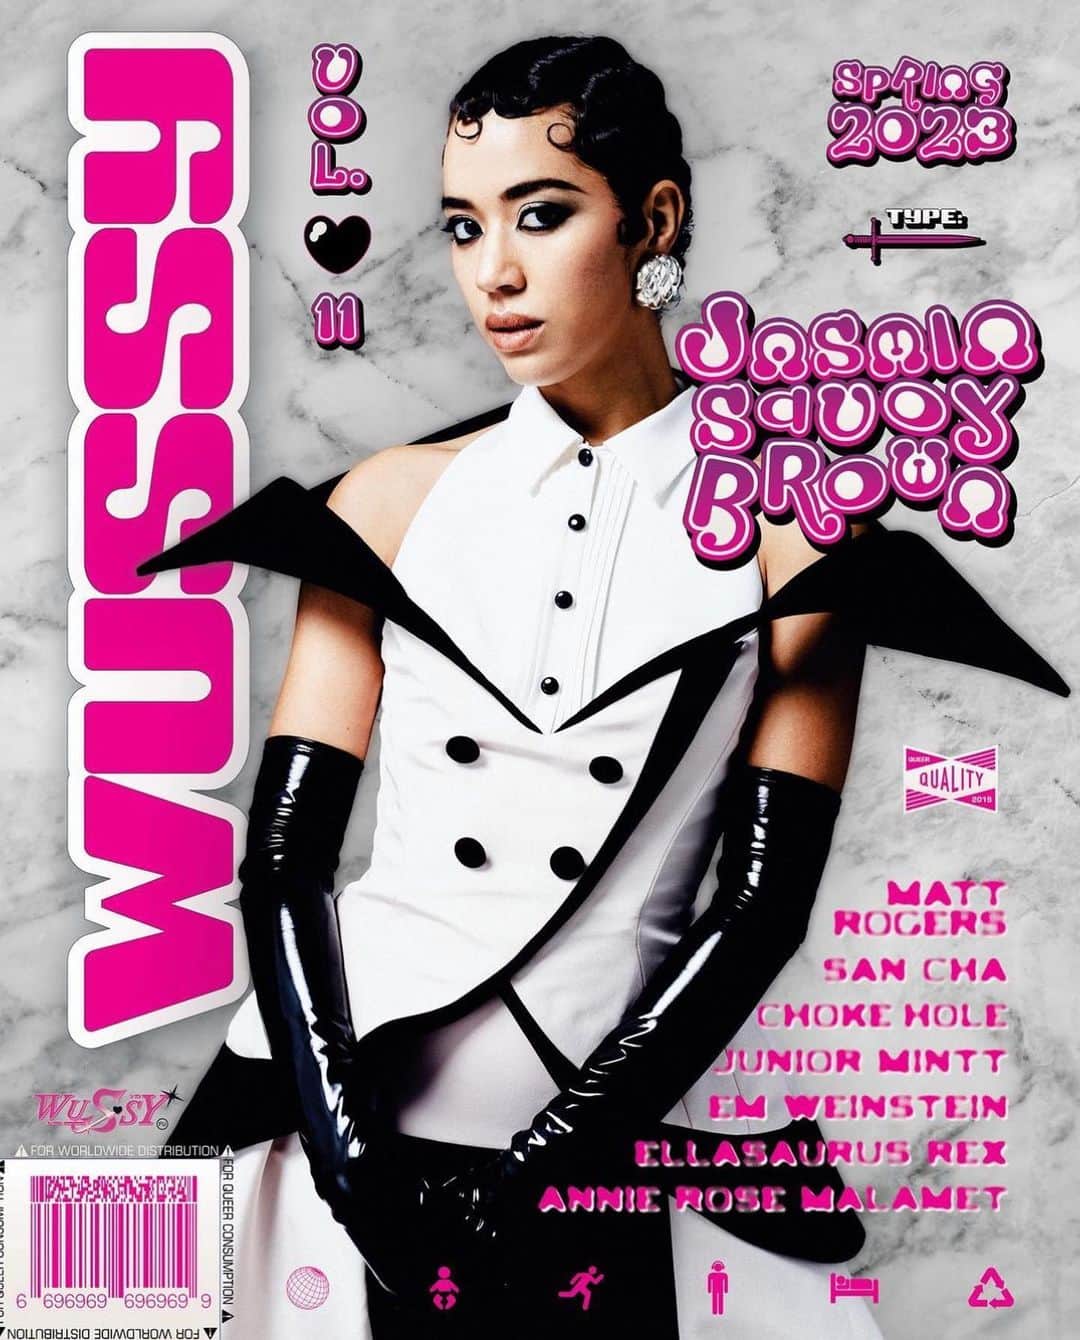 Kento Utsuboのインスタグラム：「Cover Story with beautiful @jasminsavoy for @wussymag Vol.11 💚  📸 by Lia Clay @liaclay 🧚‍♂️✨  Fashion Stylist Marisa Ellison @marisa_ellison @artdeptagency Hair by Sergio Estrada @stylebysergio Stylist Assistant Morgan Haberfield GFX by @blakengland  Interview @goodgraciousrachel MUA by Kento Utsubo @kentoutsubo Makeup assistant  @robinstrightnyc   _ _ _ _ _ It was so much fun day ✨ Please leave a like and comments below!!!❤️‍🔥 Any questions are welcome!!  今回WUSSY マガジンの撮影に参加させて頂きました✨ ありがとうございました☺️ 皆さんの感想・コメントお待ちしてます🎶 質問もお気軽にどうぞ😆」